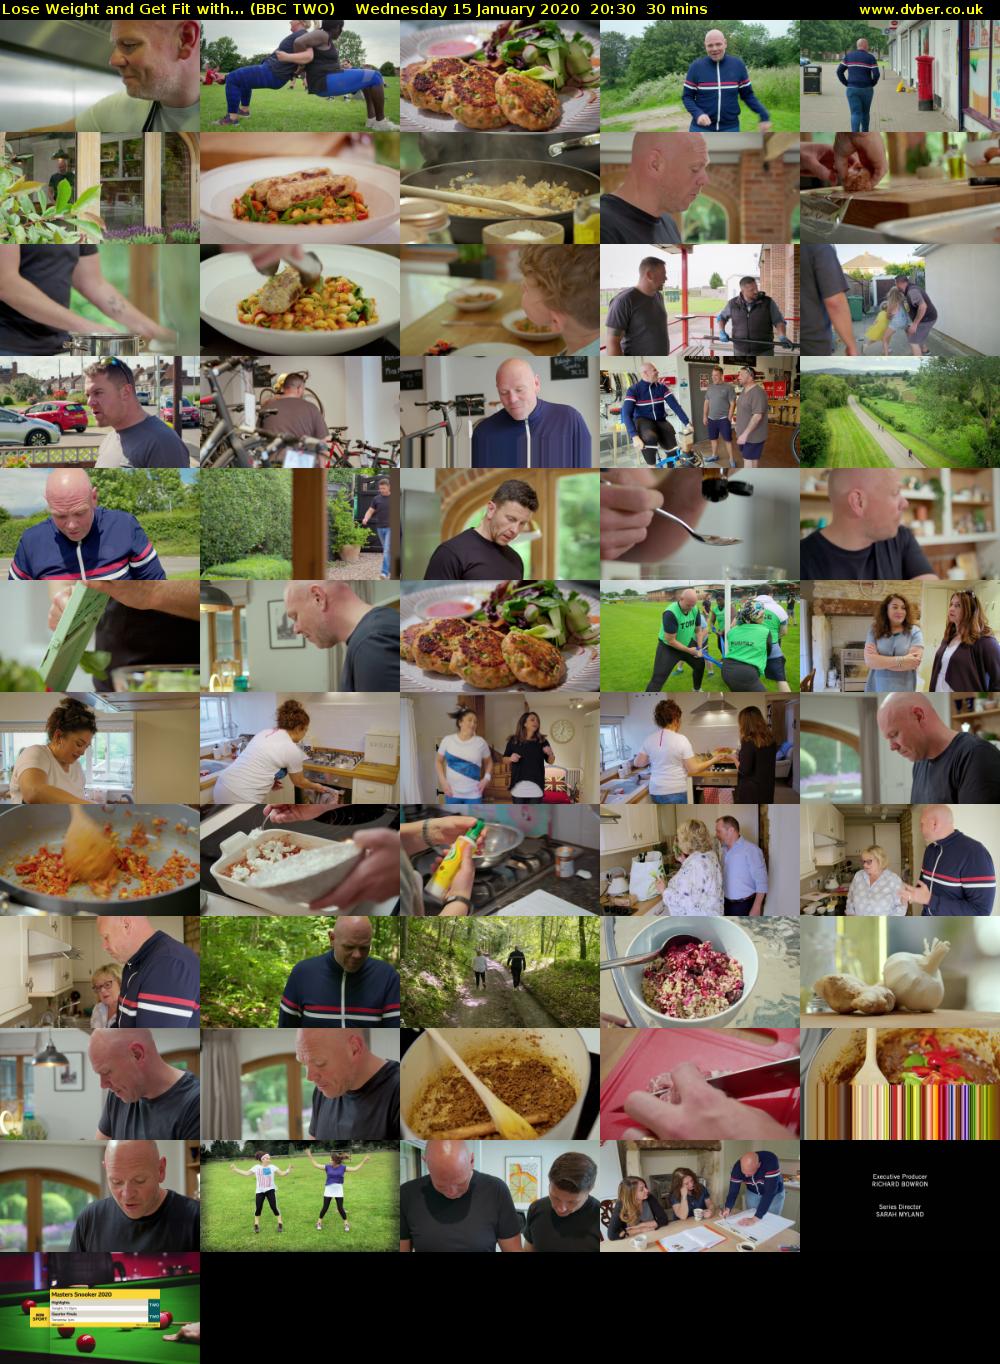 Lose Weight and Get Fit with... (BBC TWO) Wednesday 15 January 2020 20:30 - 21:00